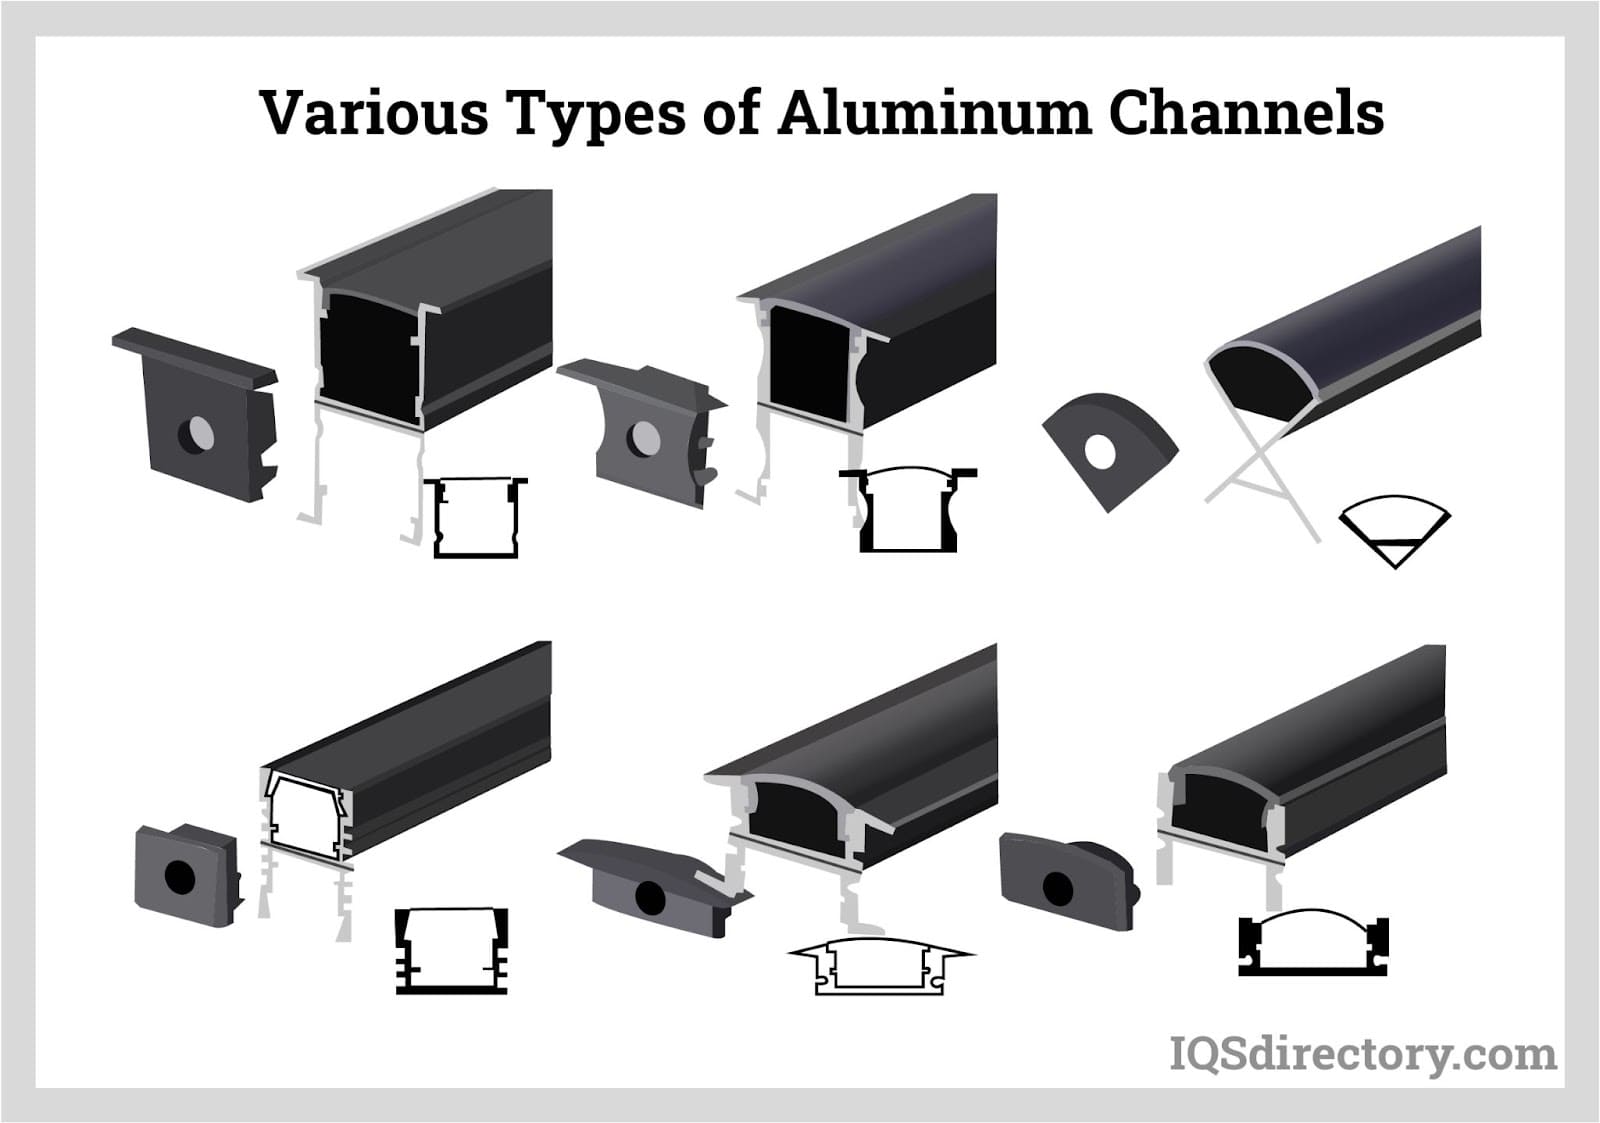 Various Types of Aluminum Channels